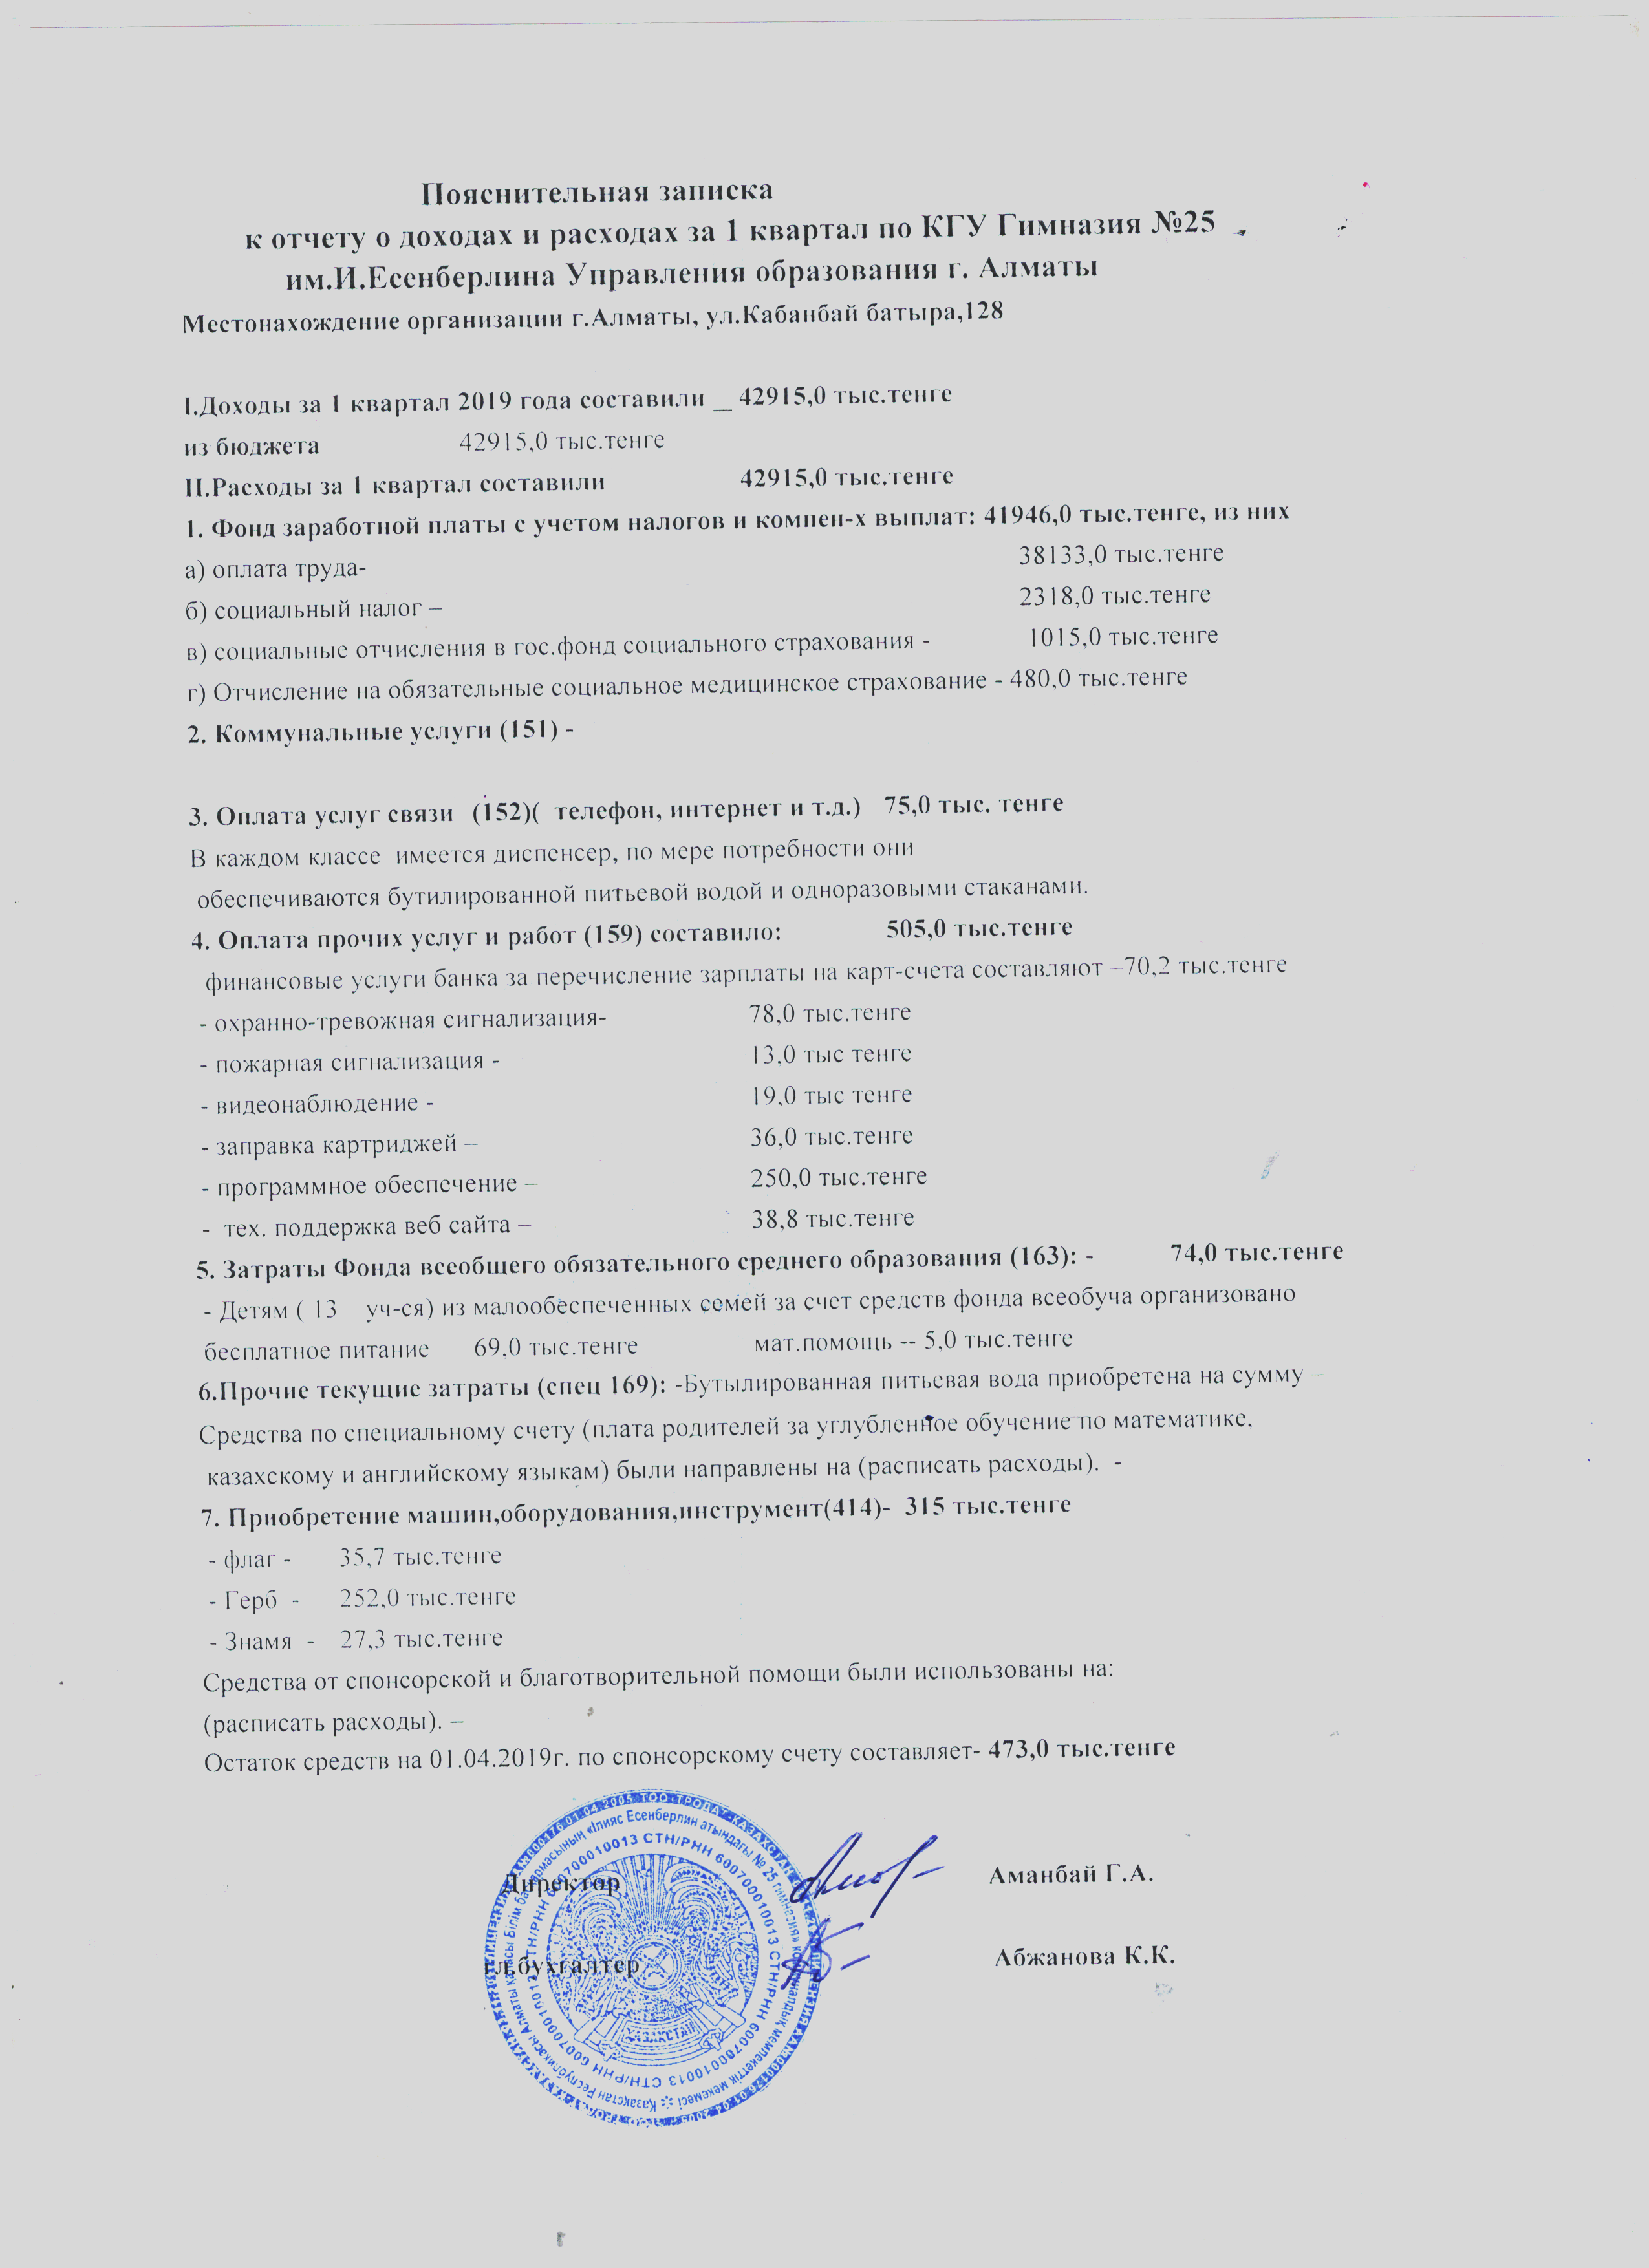 Statement of income and expenses за 1 квартал 2019 года